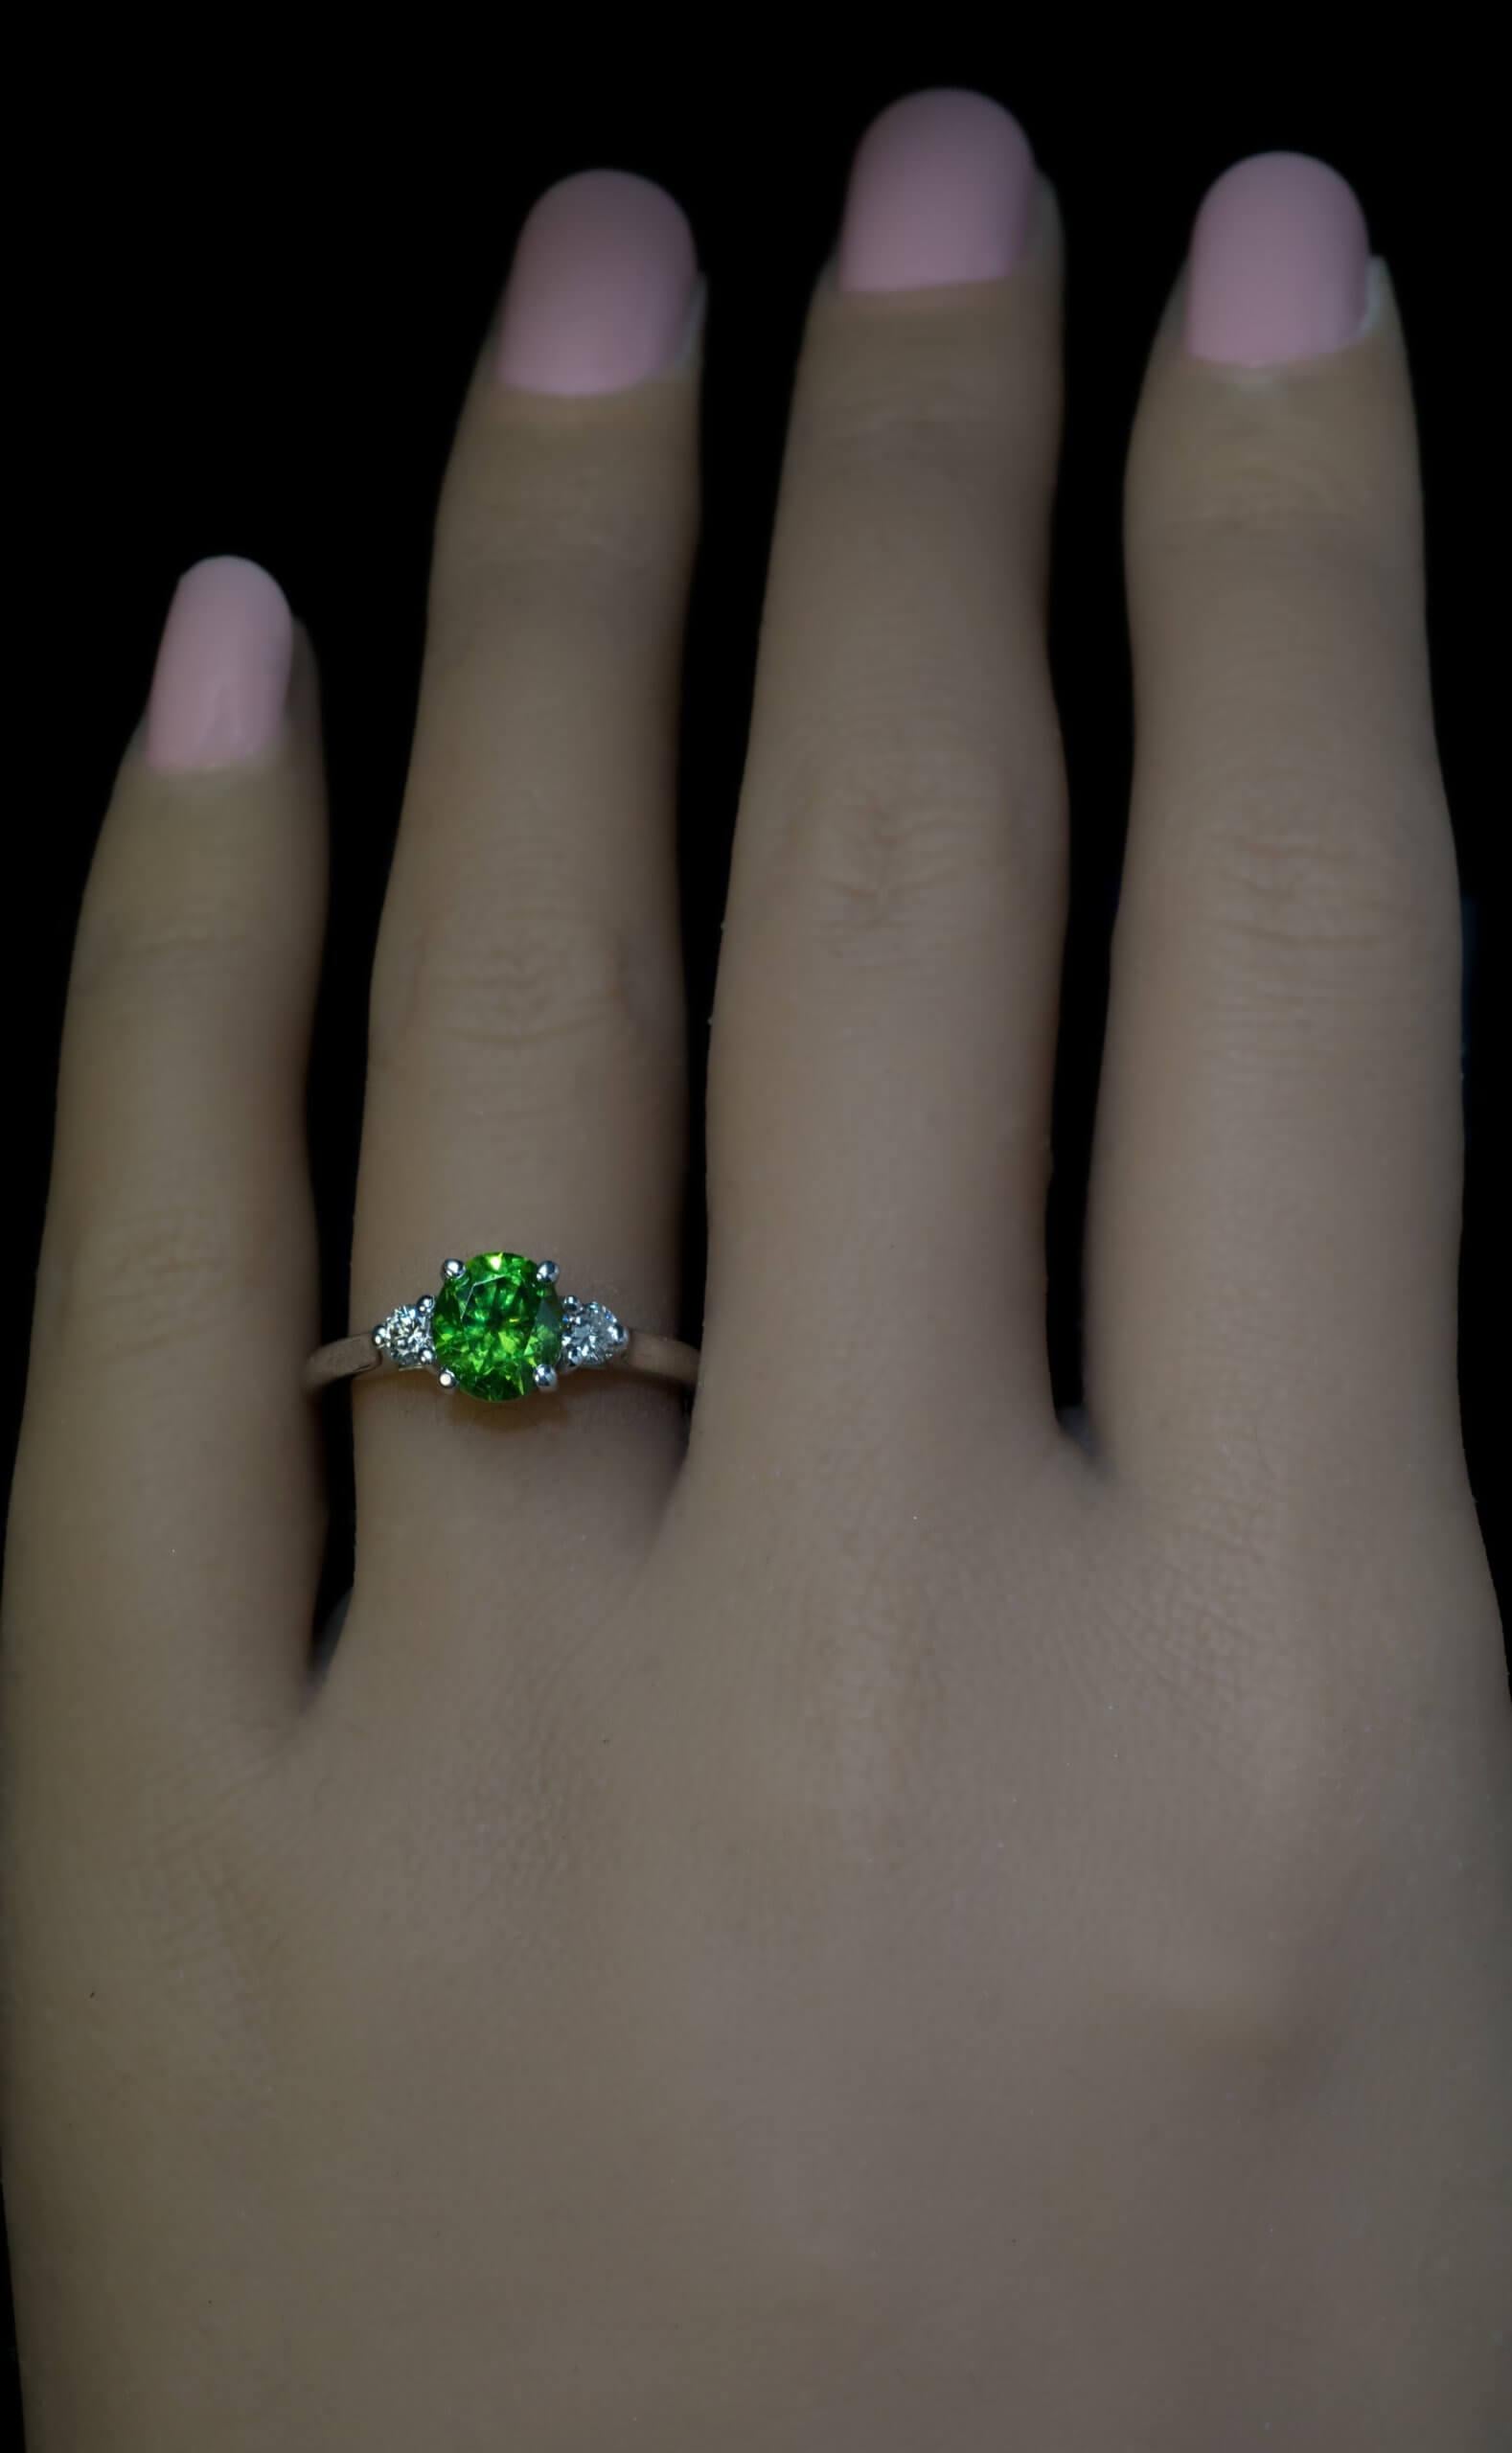 This contemporary custom-made 18K white gold ring features an oval 1.69 ct Russian demantoid (7.4 x 6.3 x 4.7 mm) of excellent golden green color. The demantoid is flanked by two bright white diamonds ( 0.20 ct total weight, F-G color, VS-SI